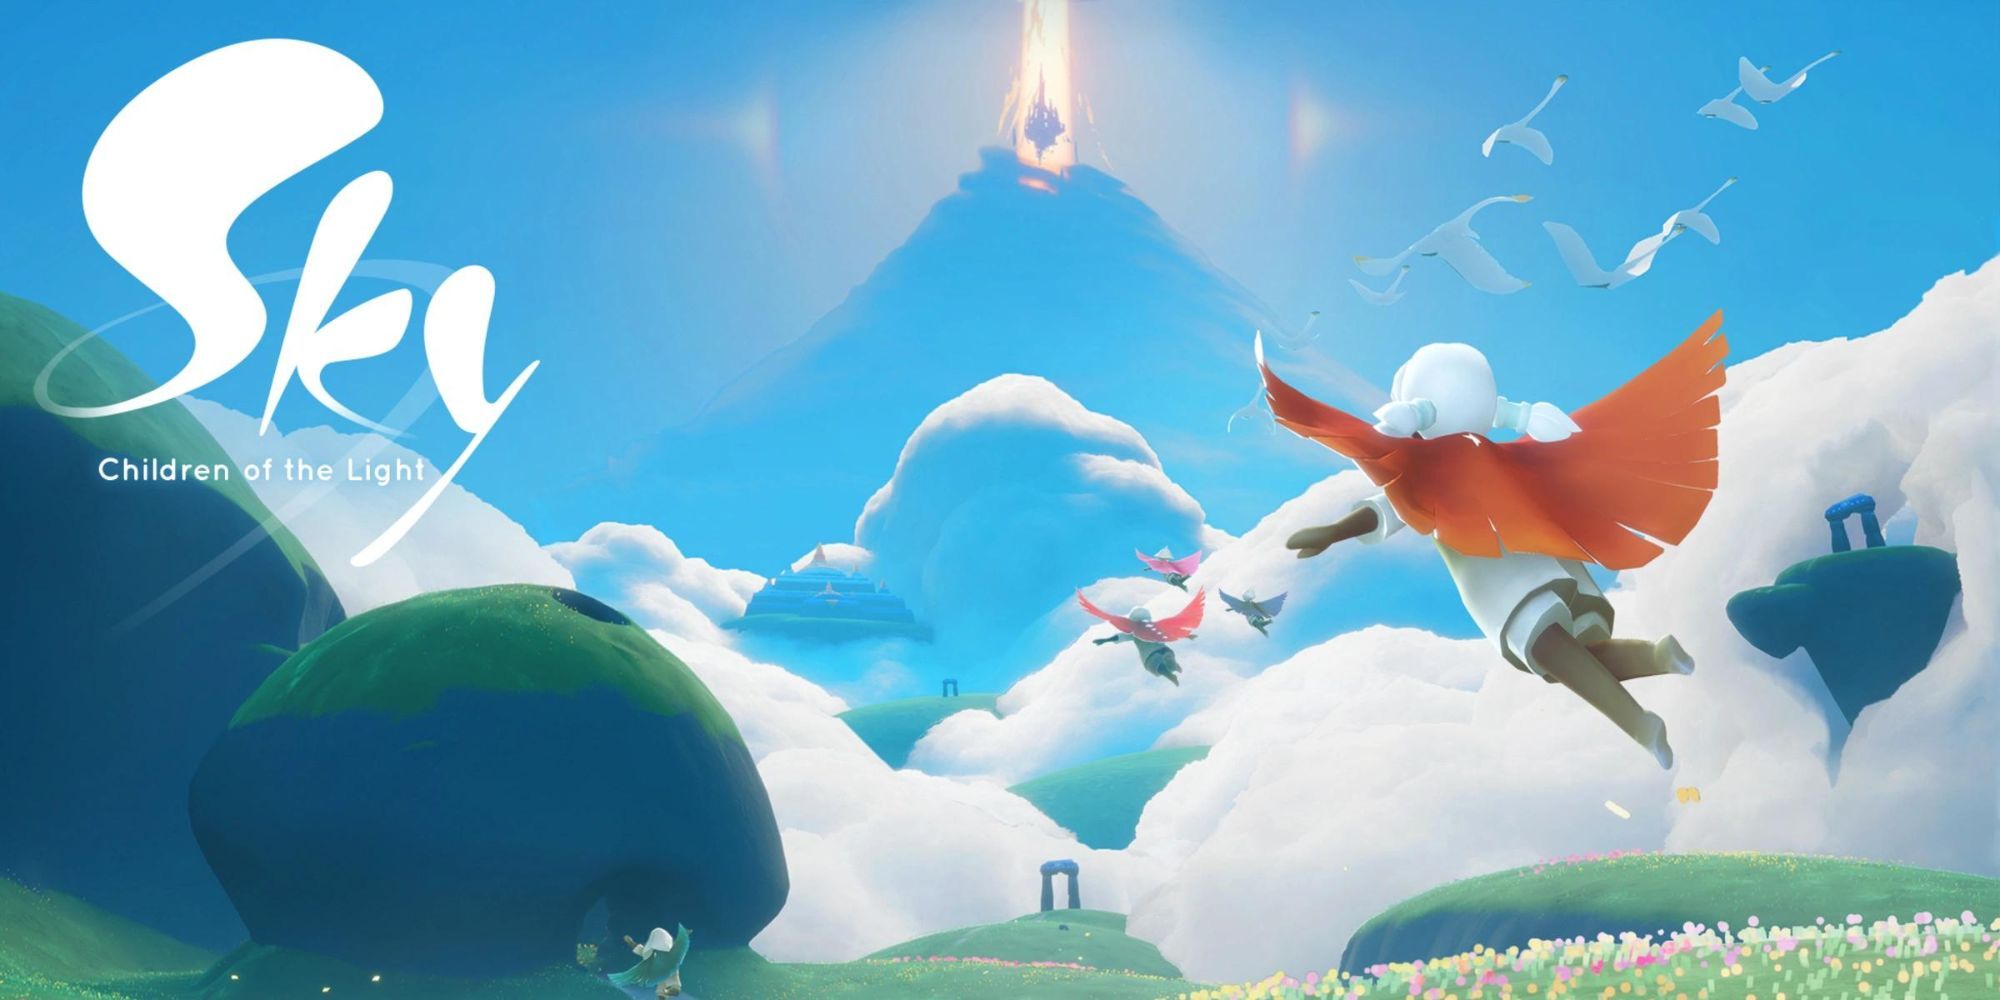 Sky Children of the Light title image showing main character flying through a meadow.